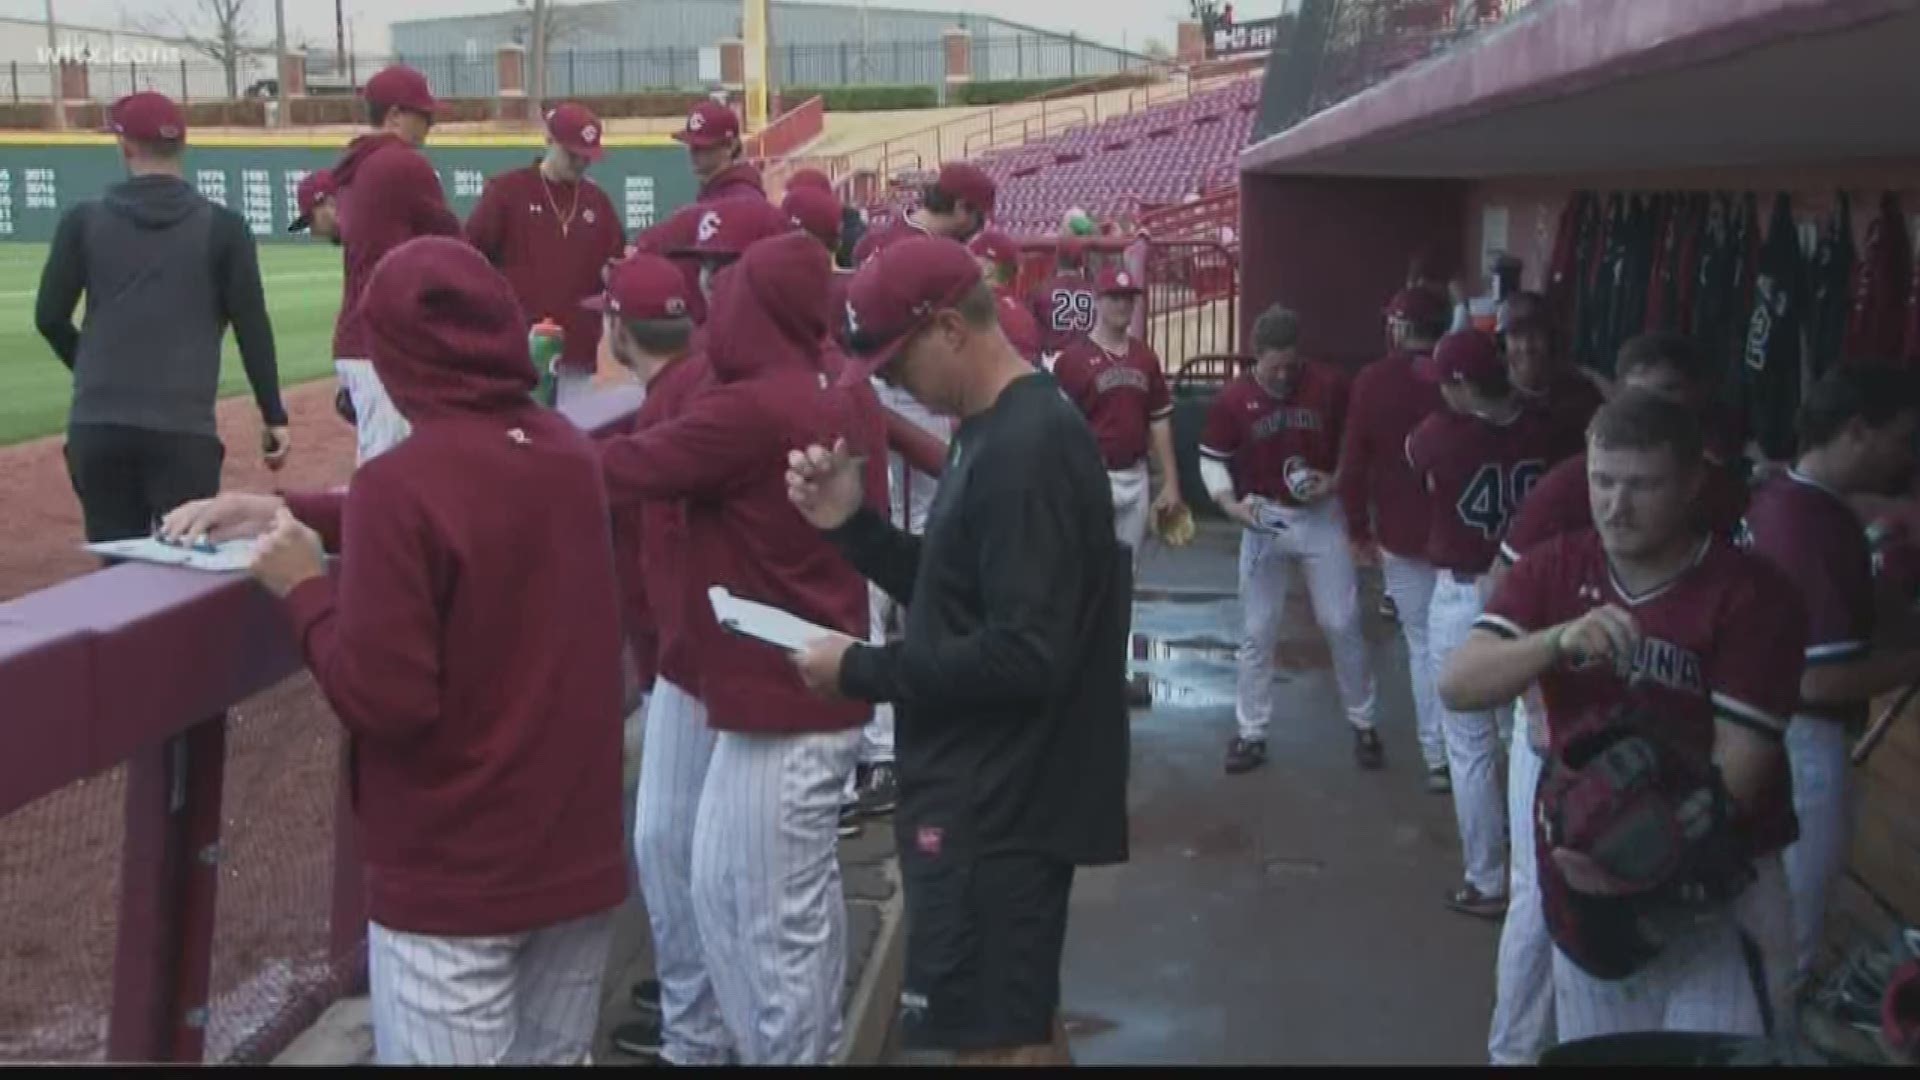 USC Baseball holds their first open practice of the year.